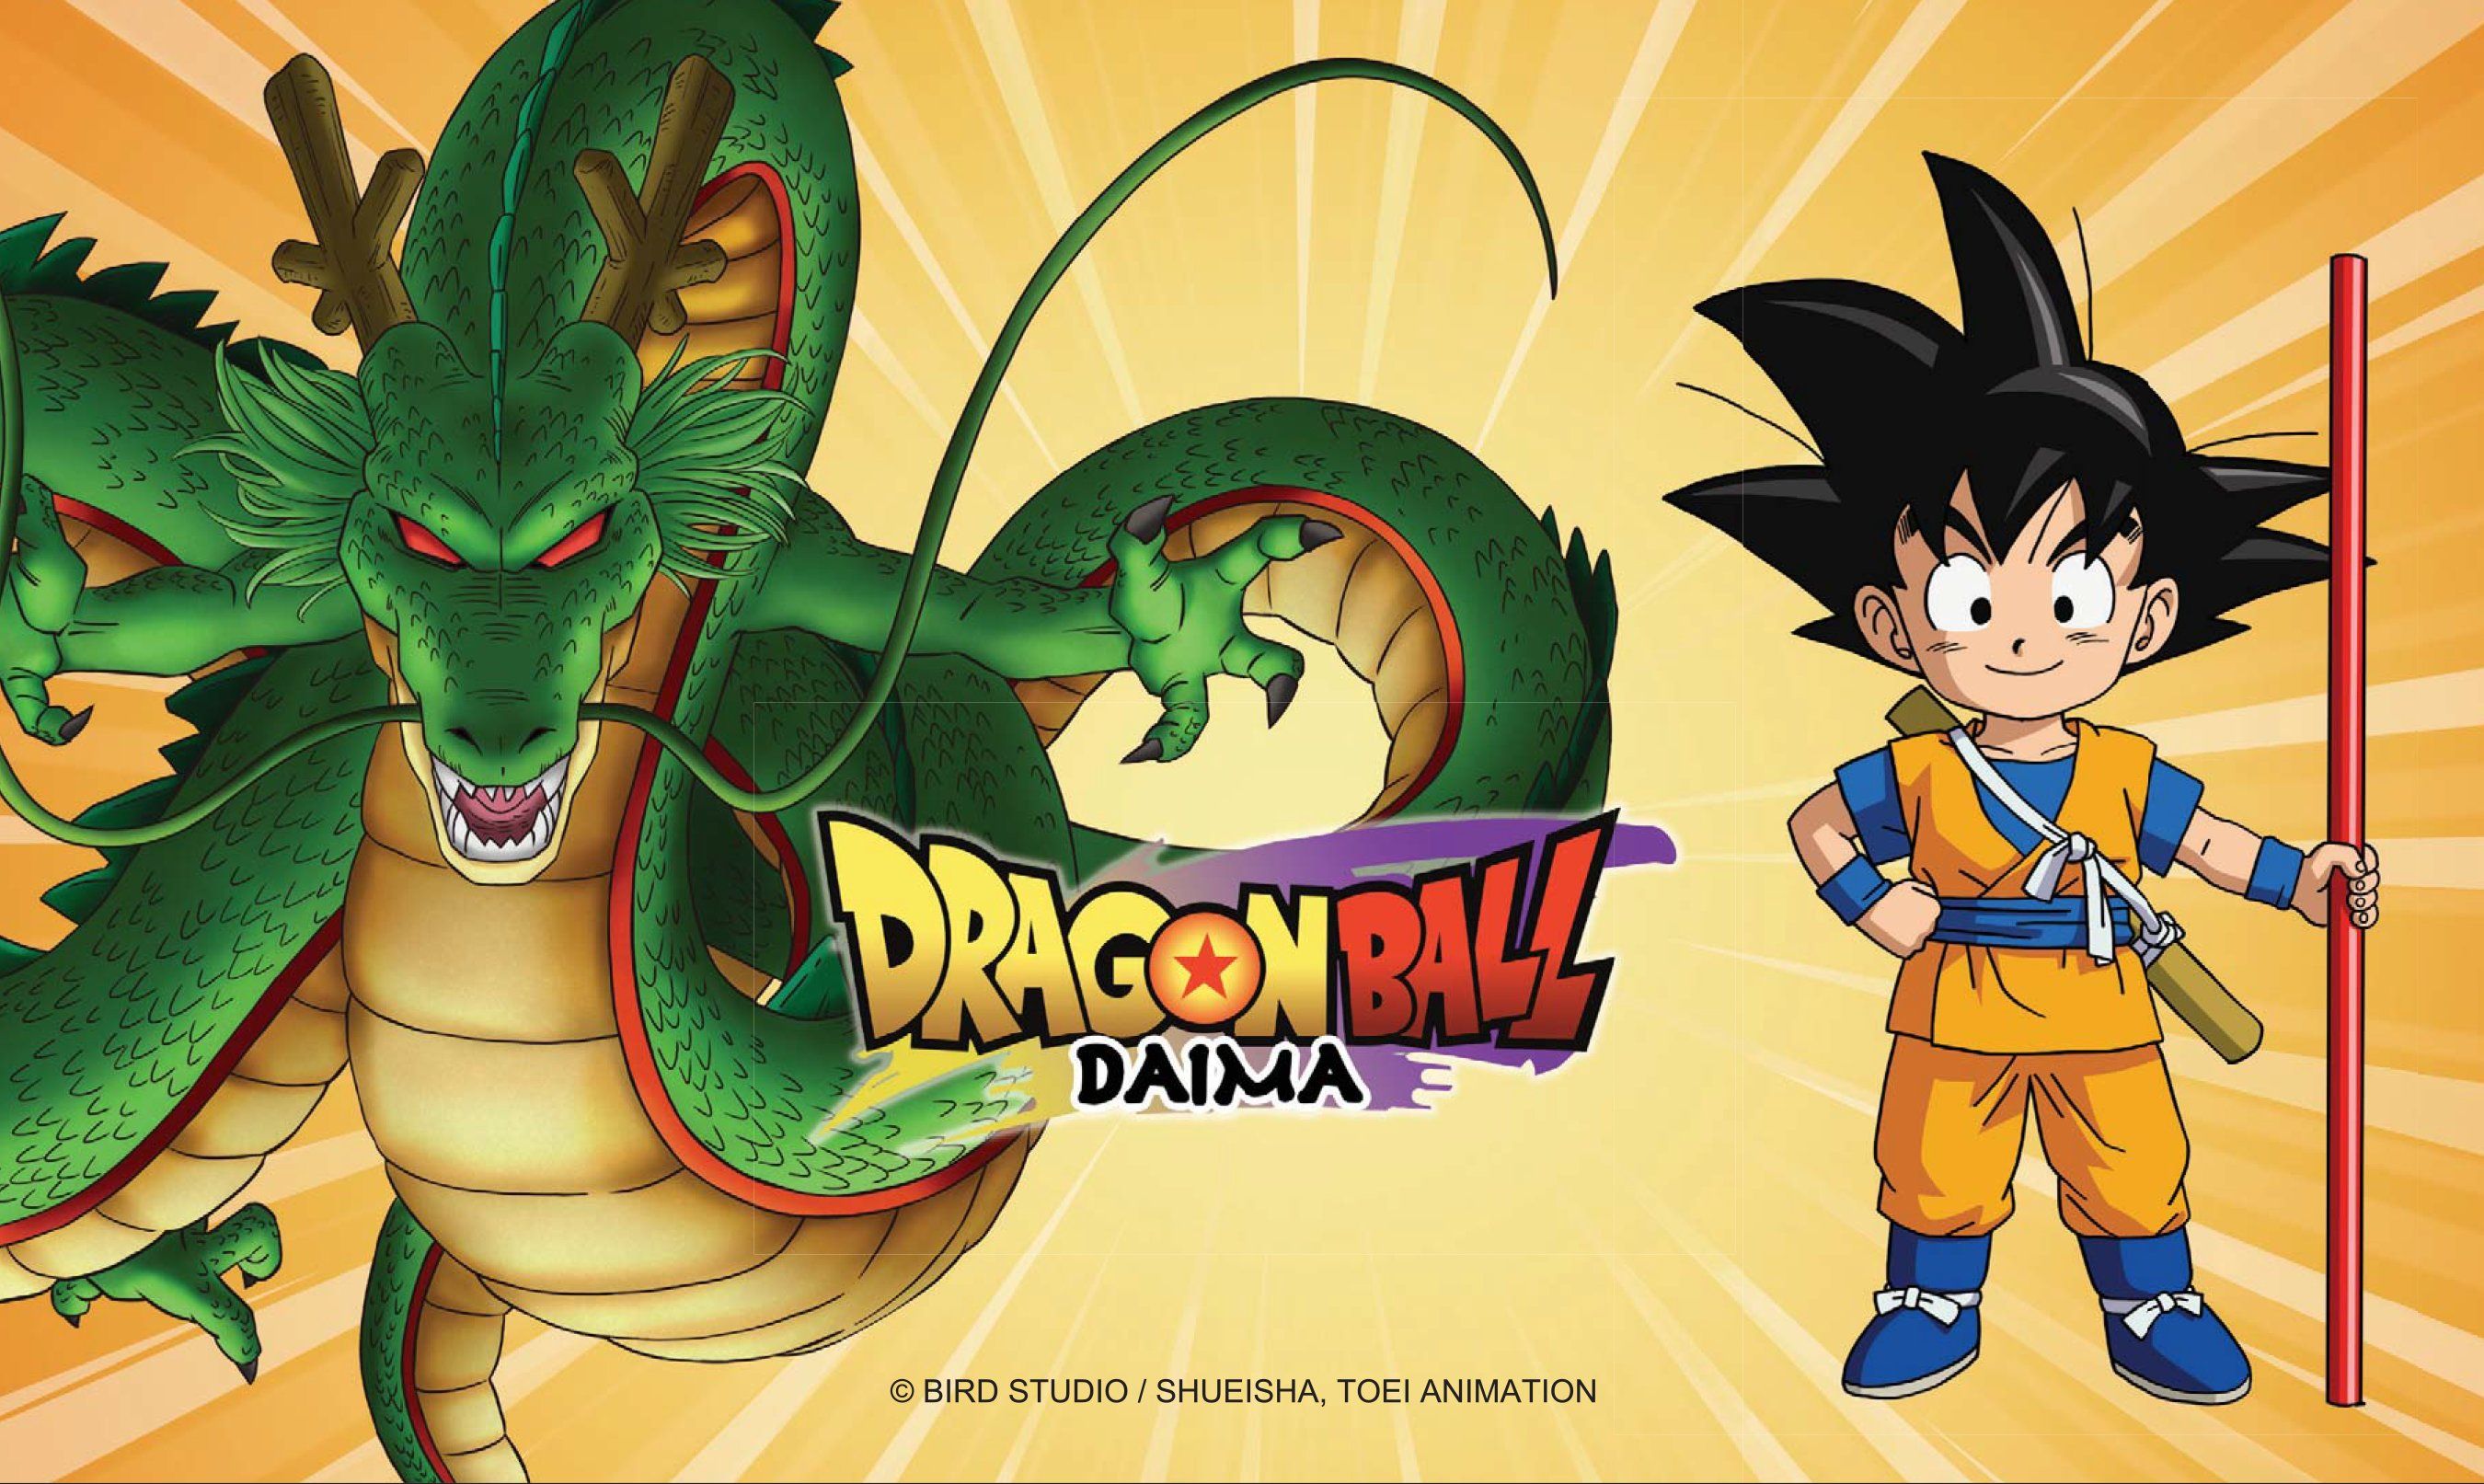 Dragon Ball Gets New Official Daima Artwork Release – To the Ire of Fans